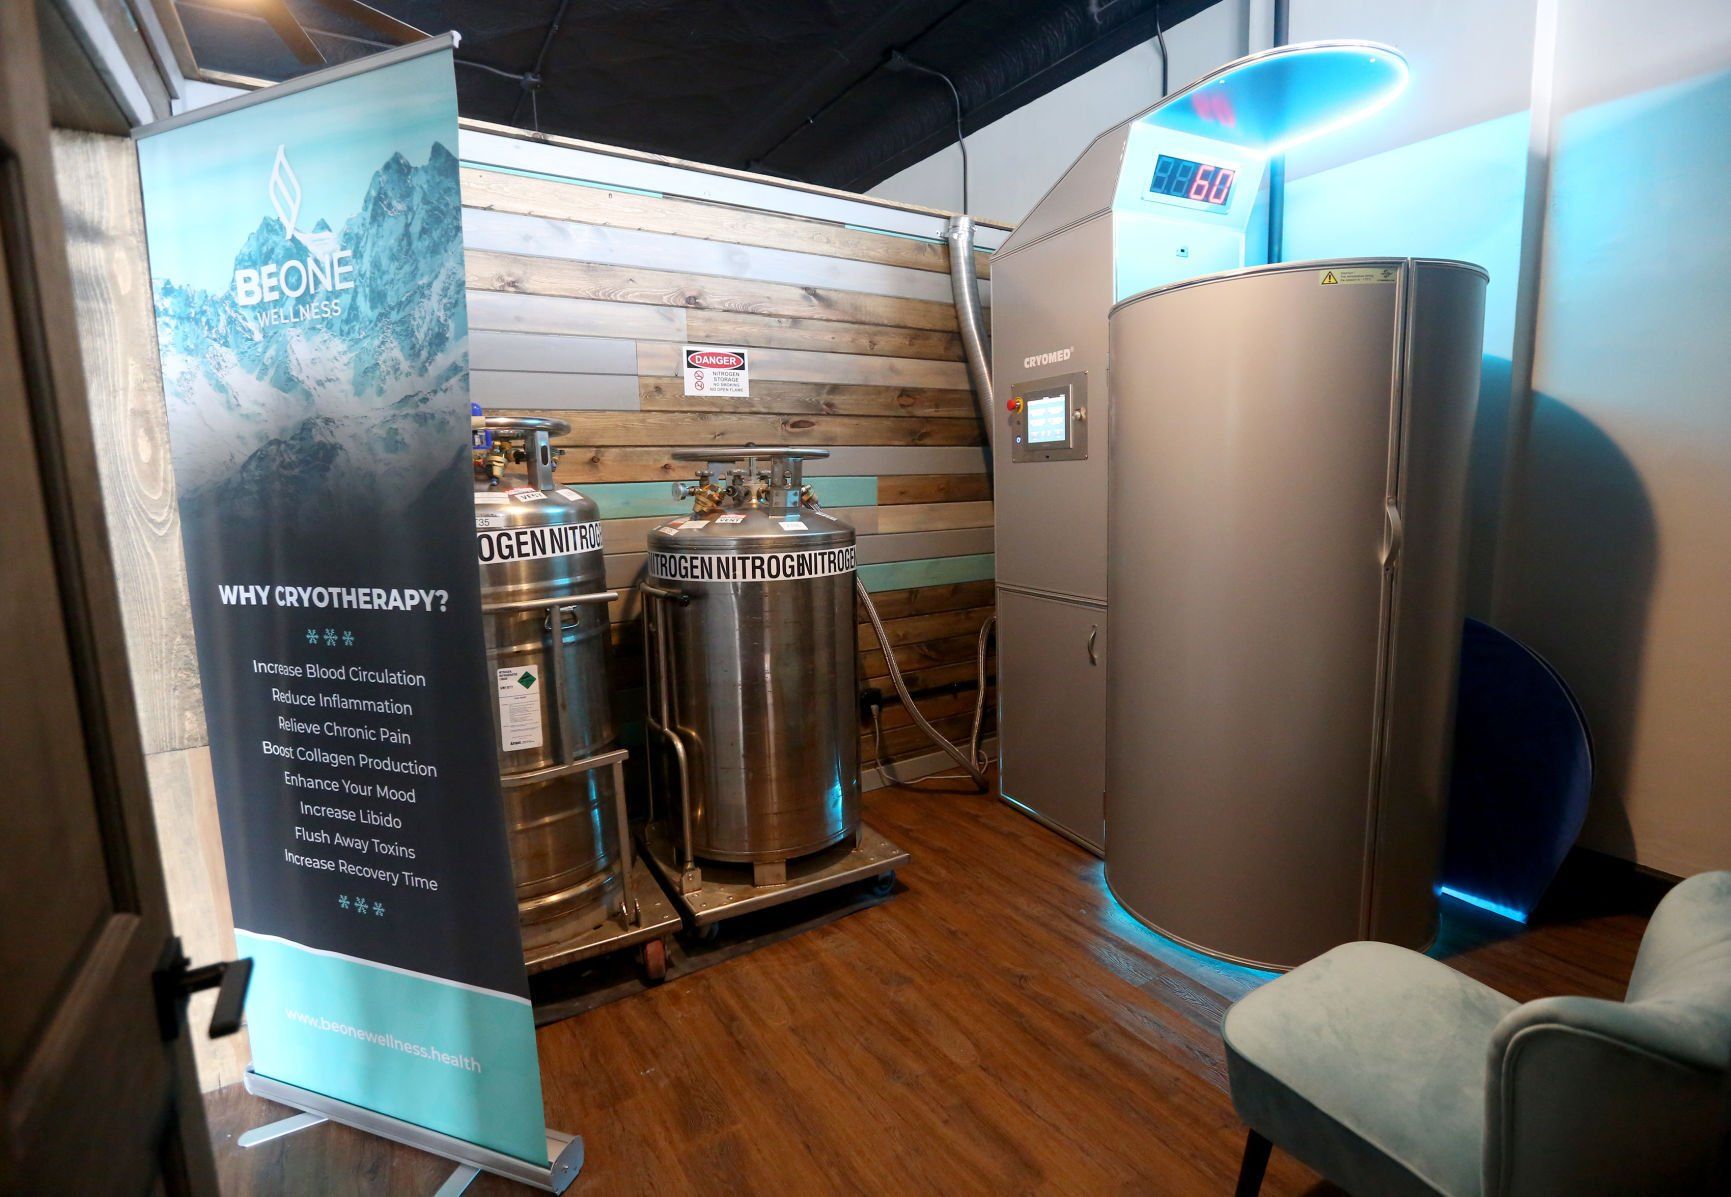 A cryotherapy room at Be One Wellness.    PHOTO CREDIT: JESSICA REILLY